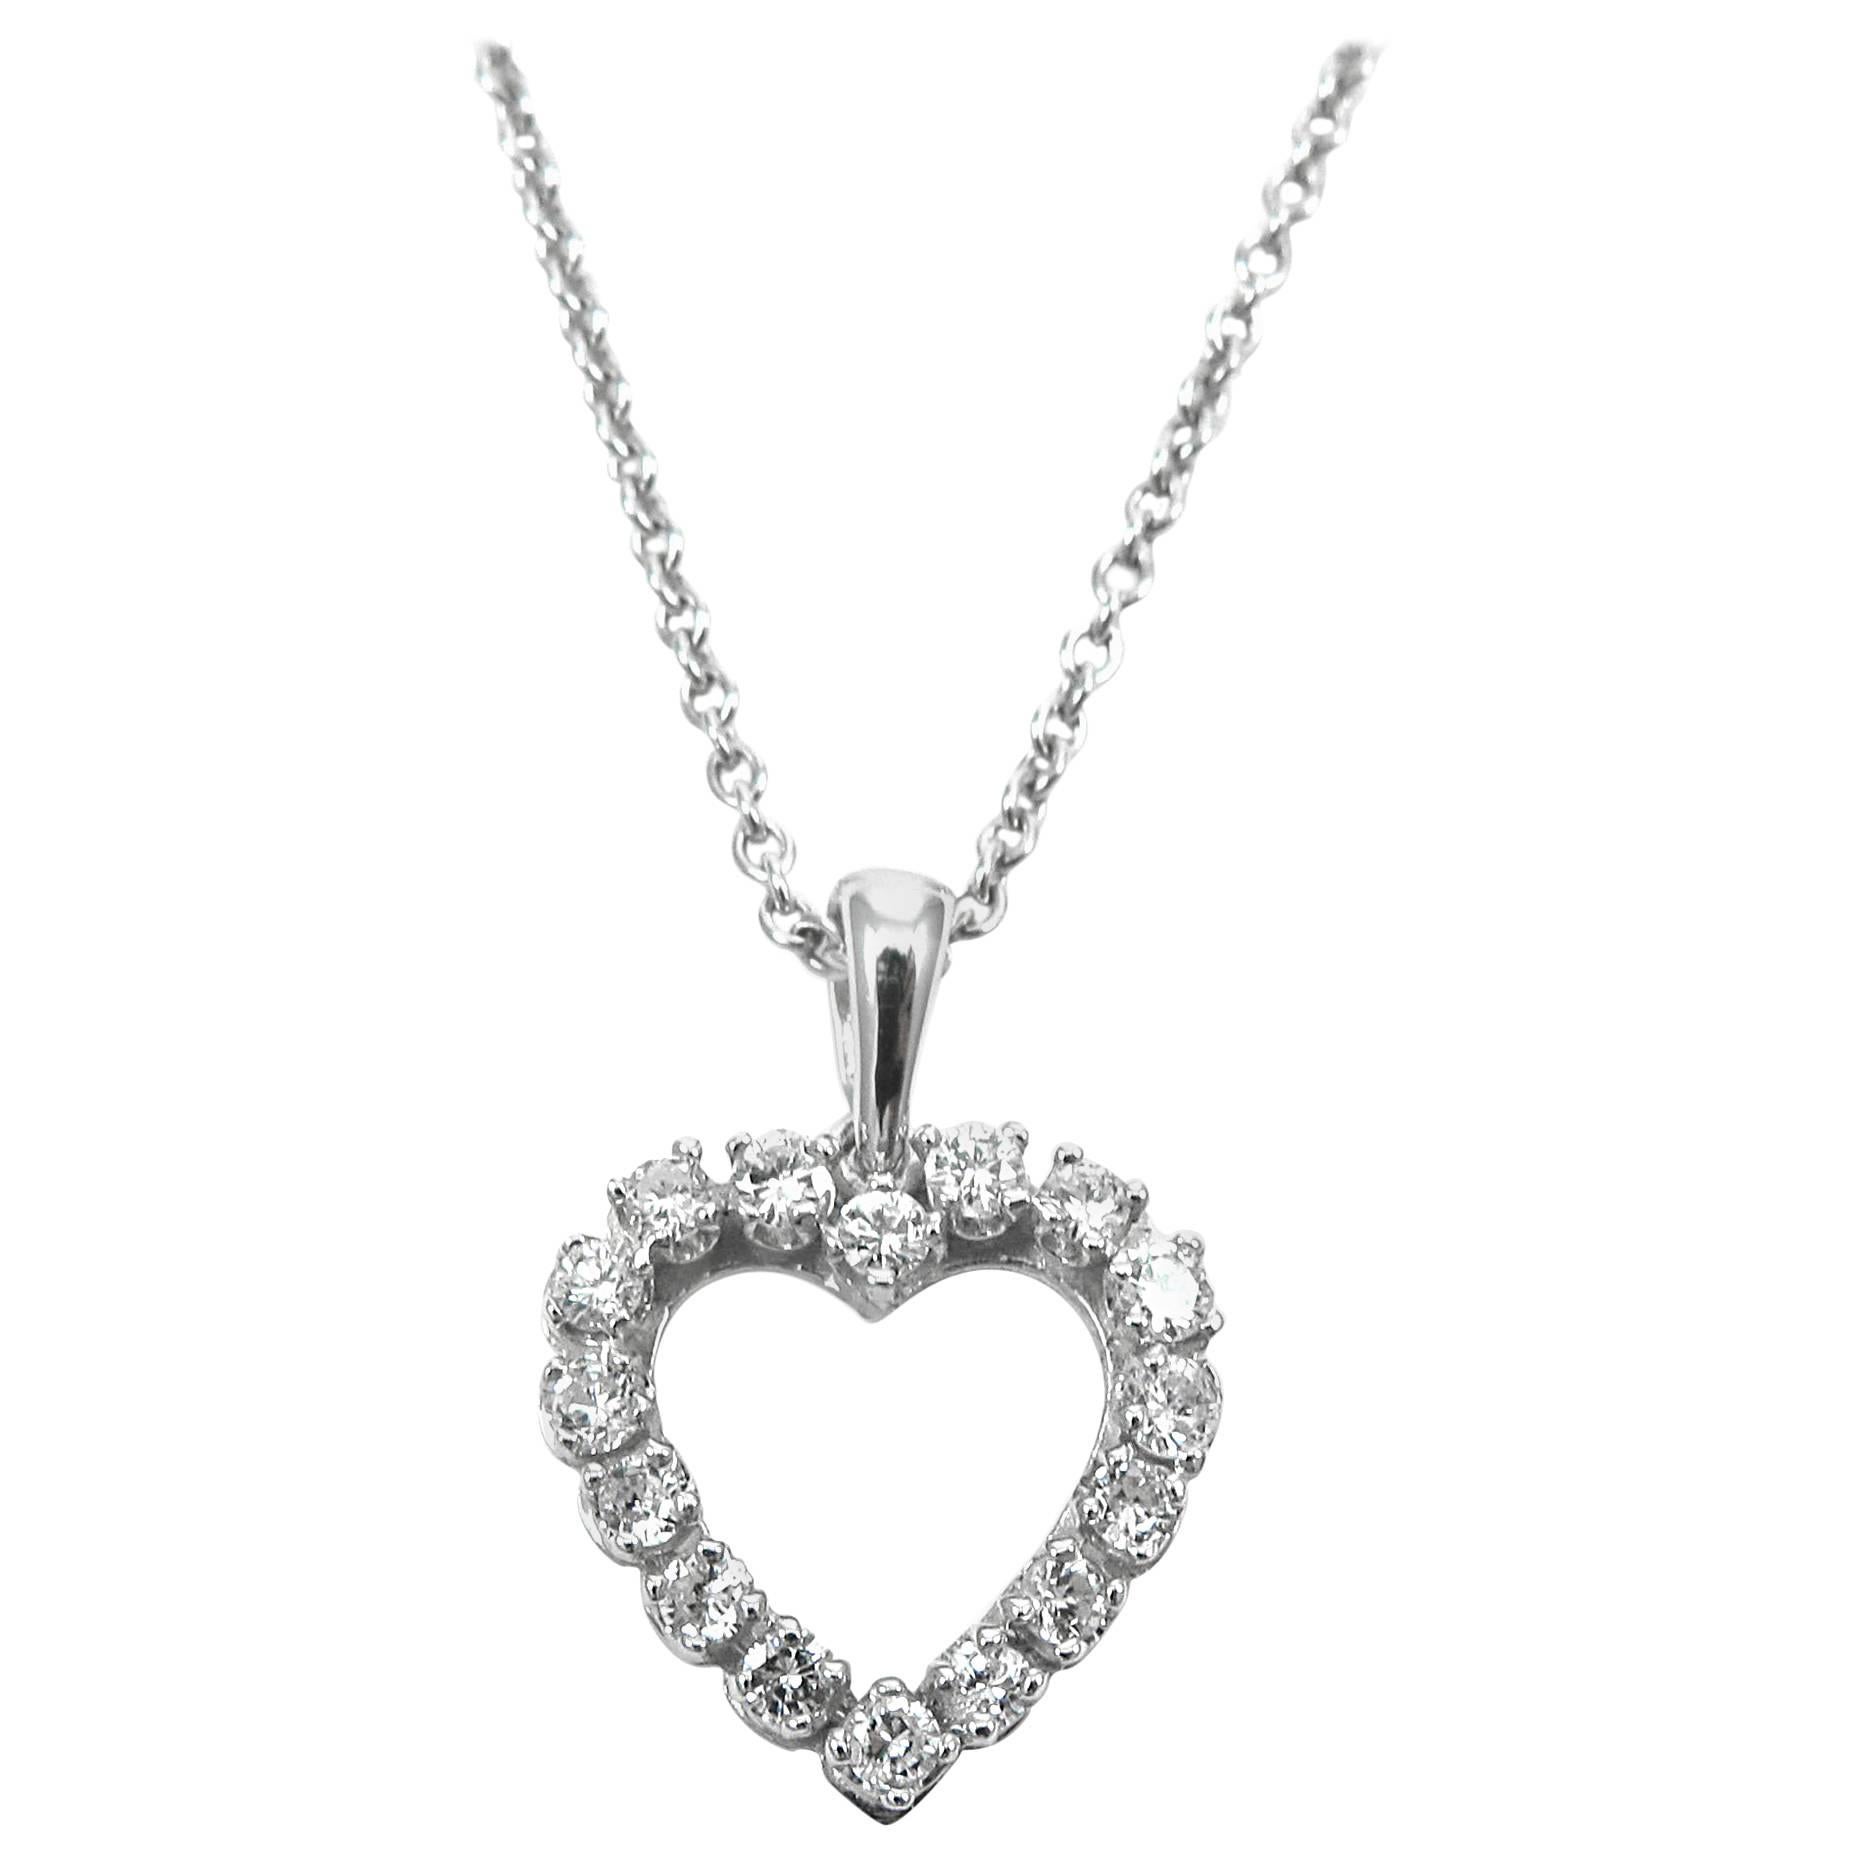 0.96 Carat Total Diamond and White Gold Heart Pendant Necklace